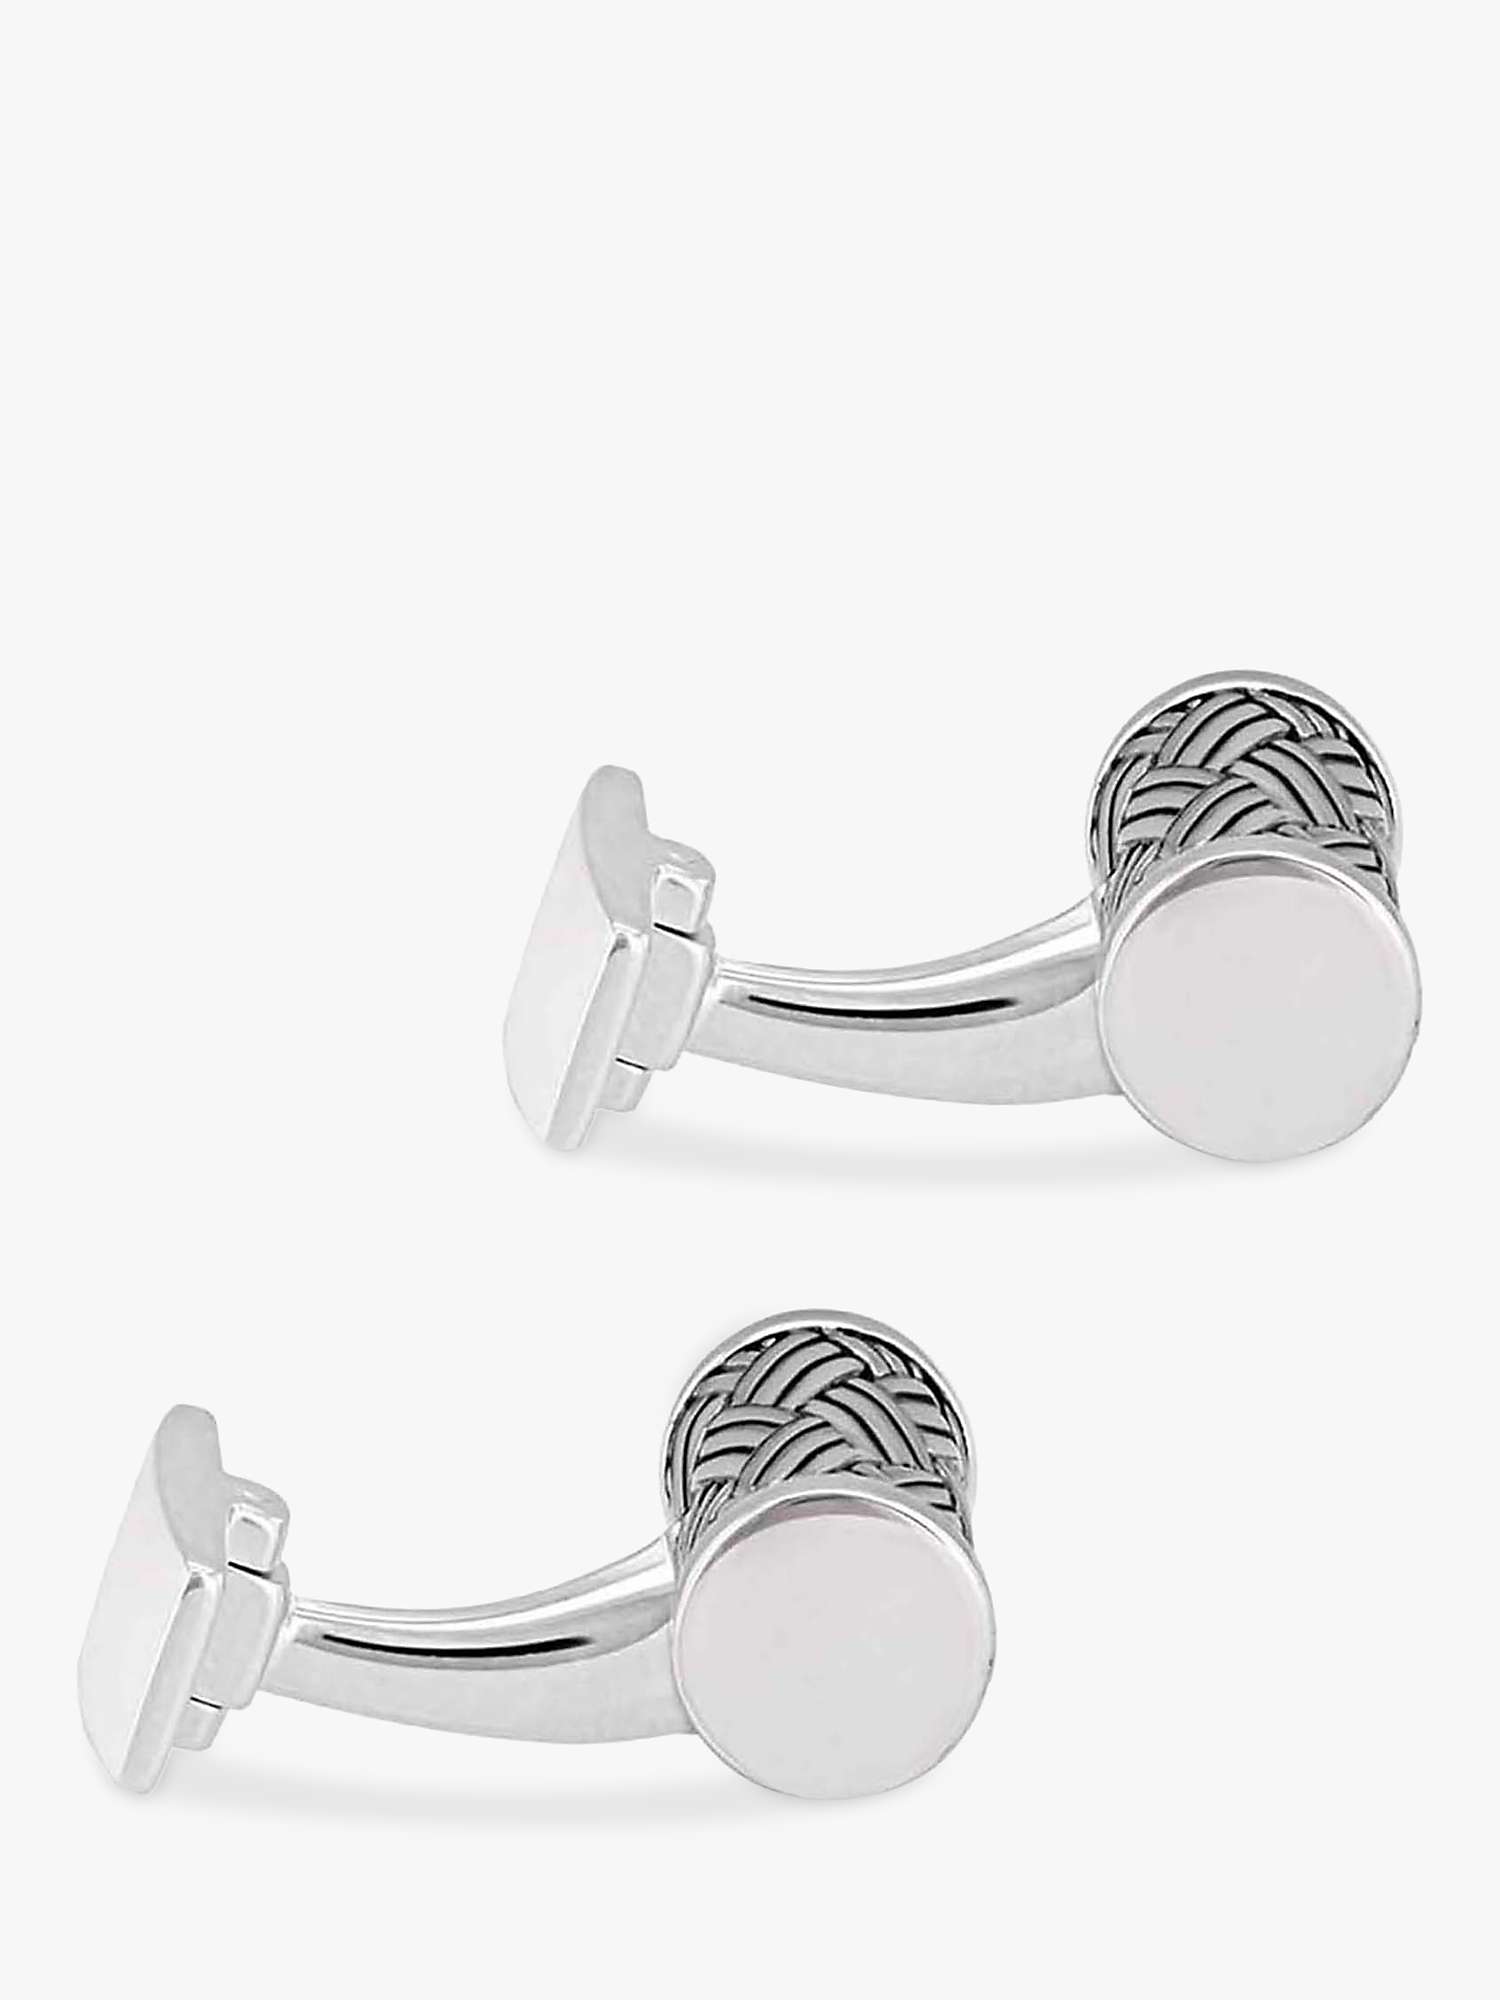 Buy Hoxton London Woven Pattern Cylinder Oxidised Cufflinks, Silver Online at johnlewis.com